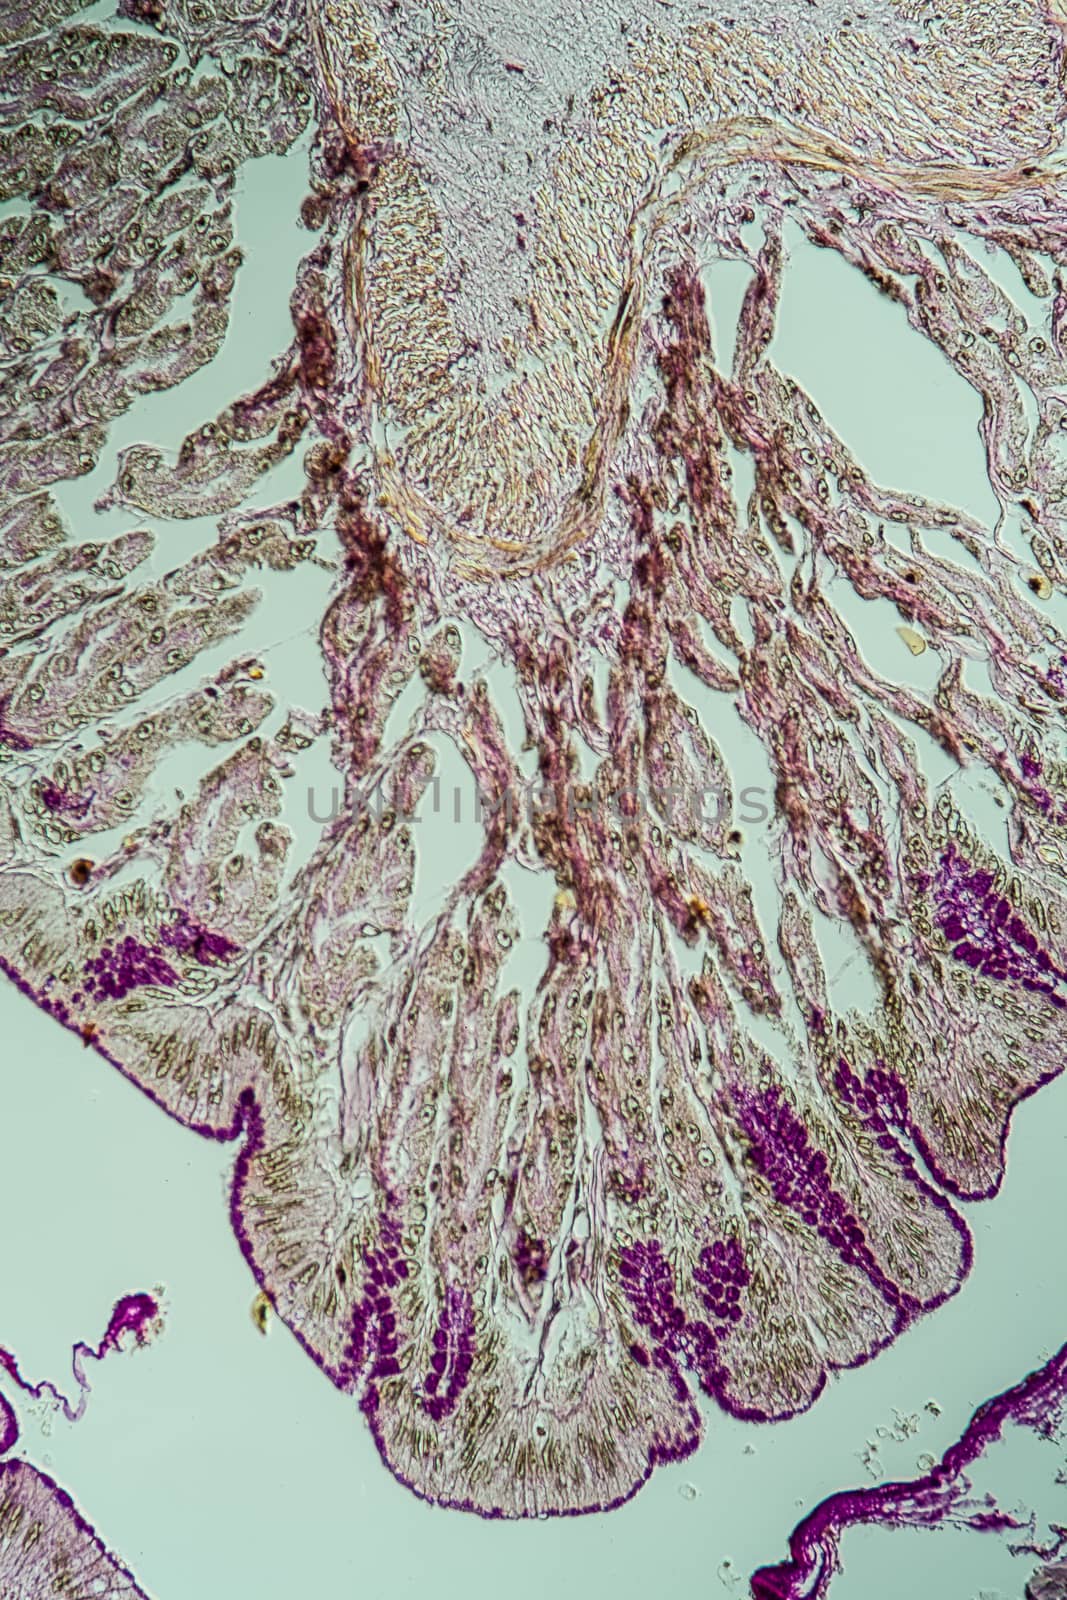 Cross-section through the intestine with glands 200x